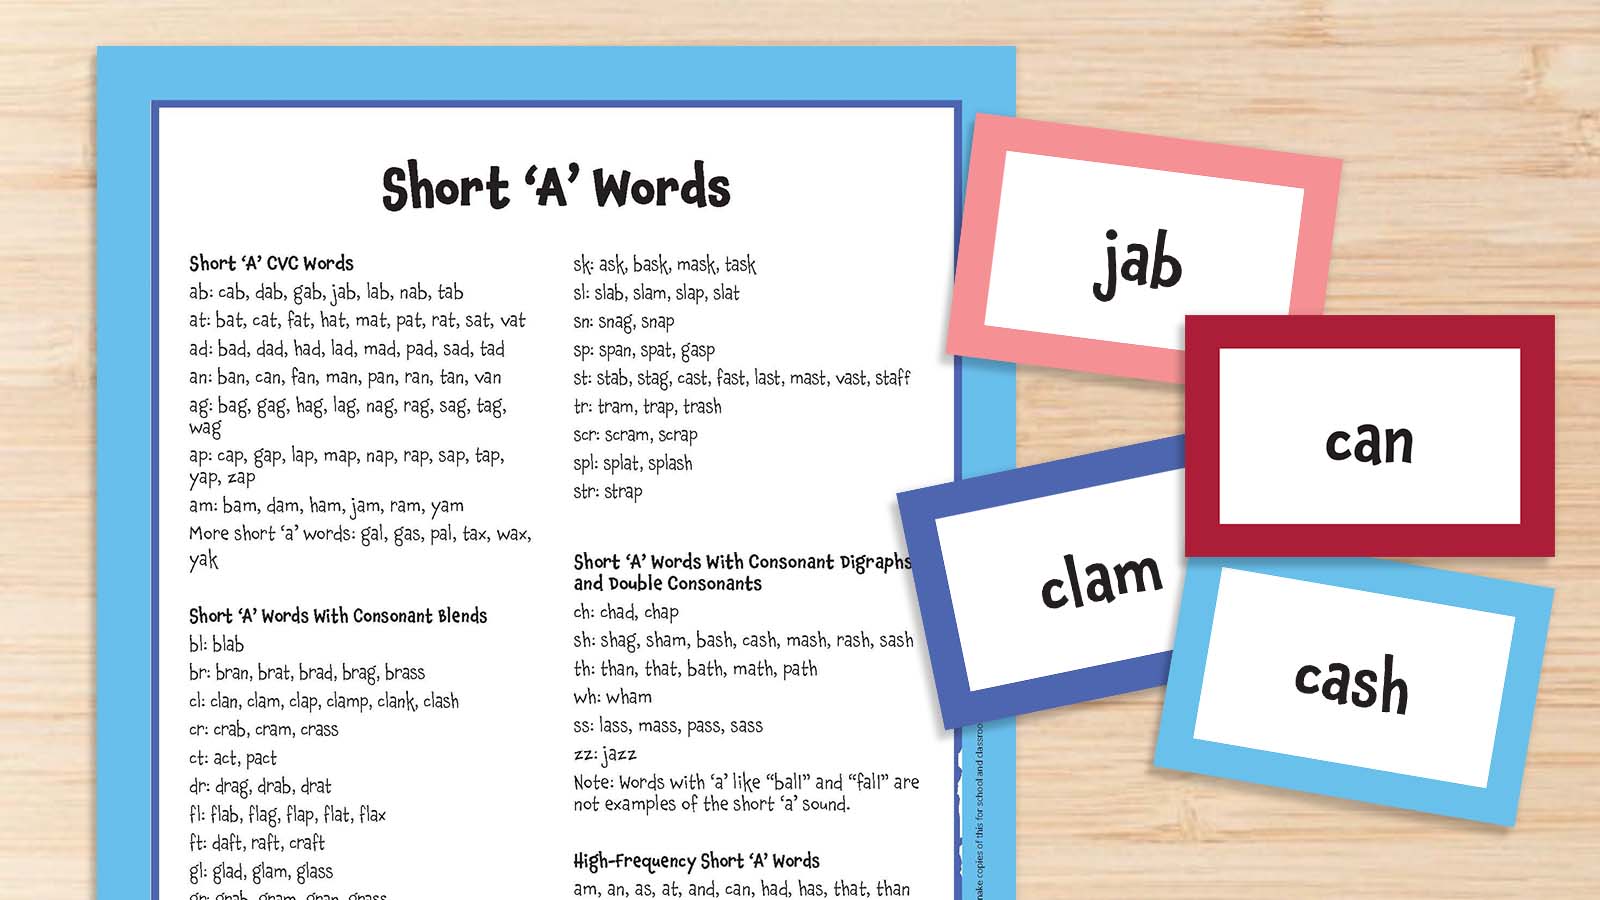 Short a words list and flashcards on desk.